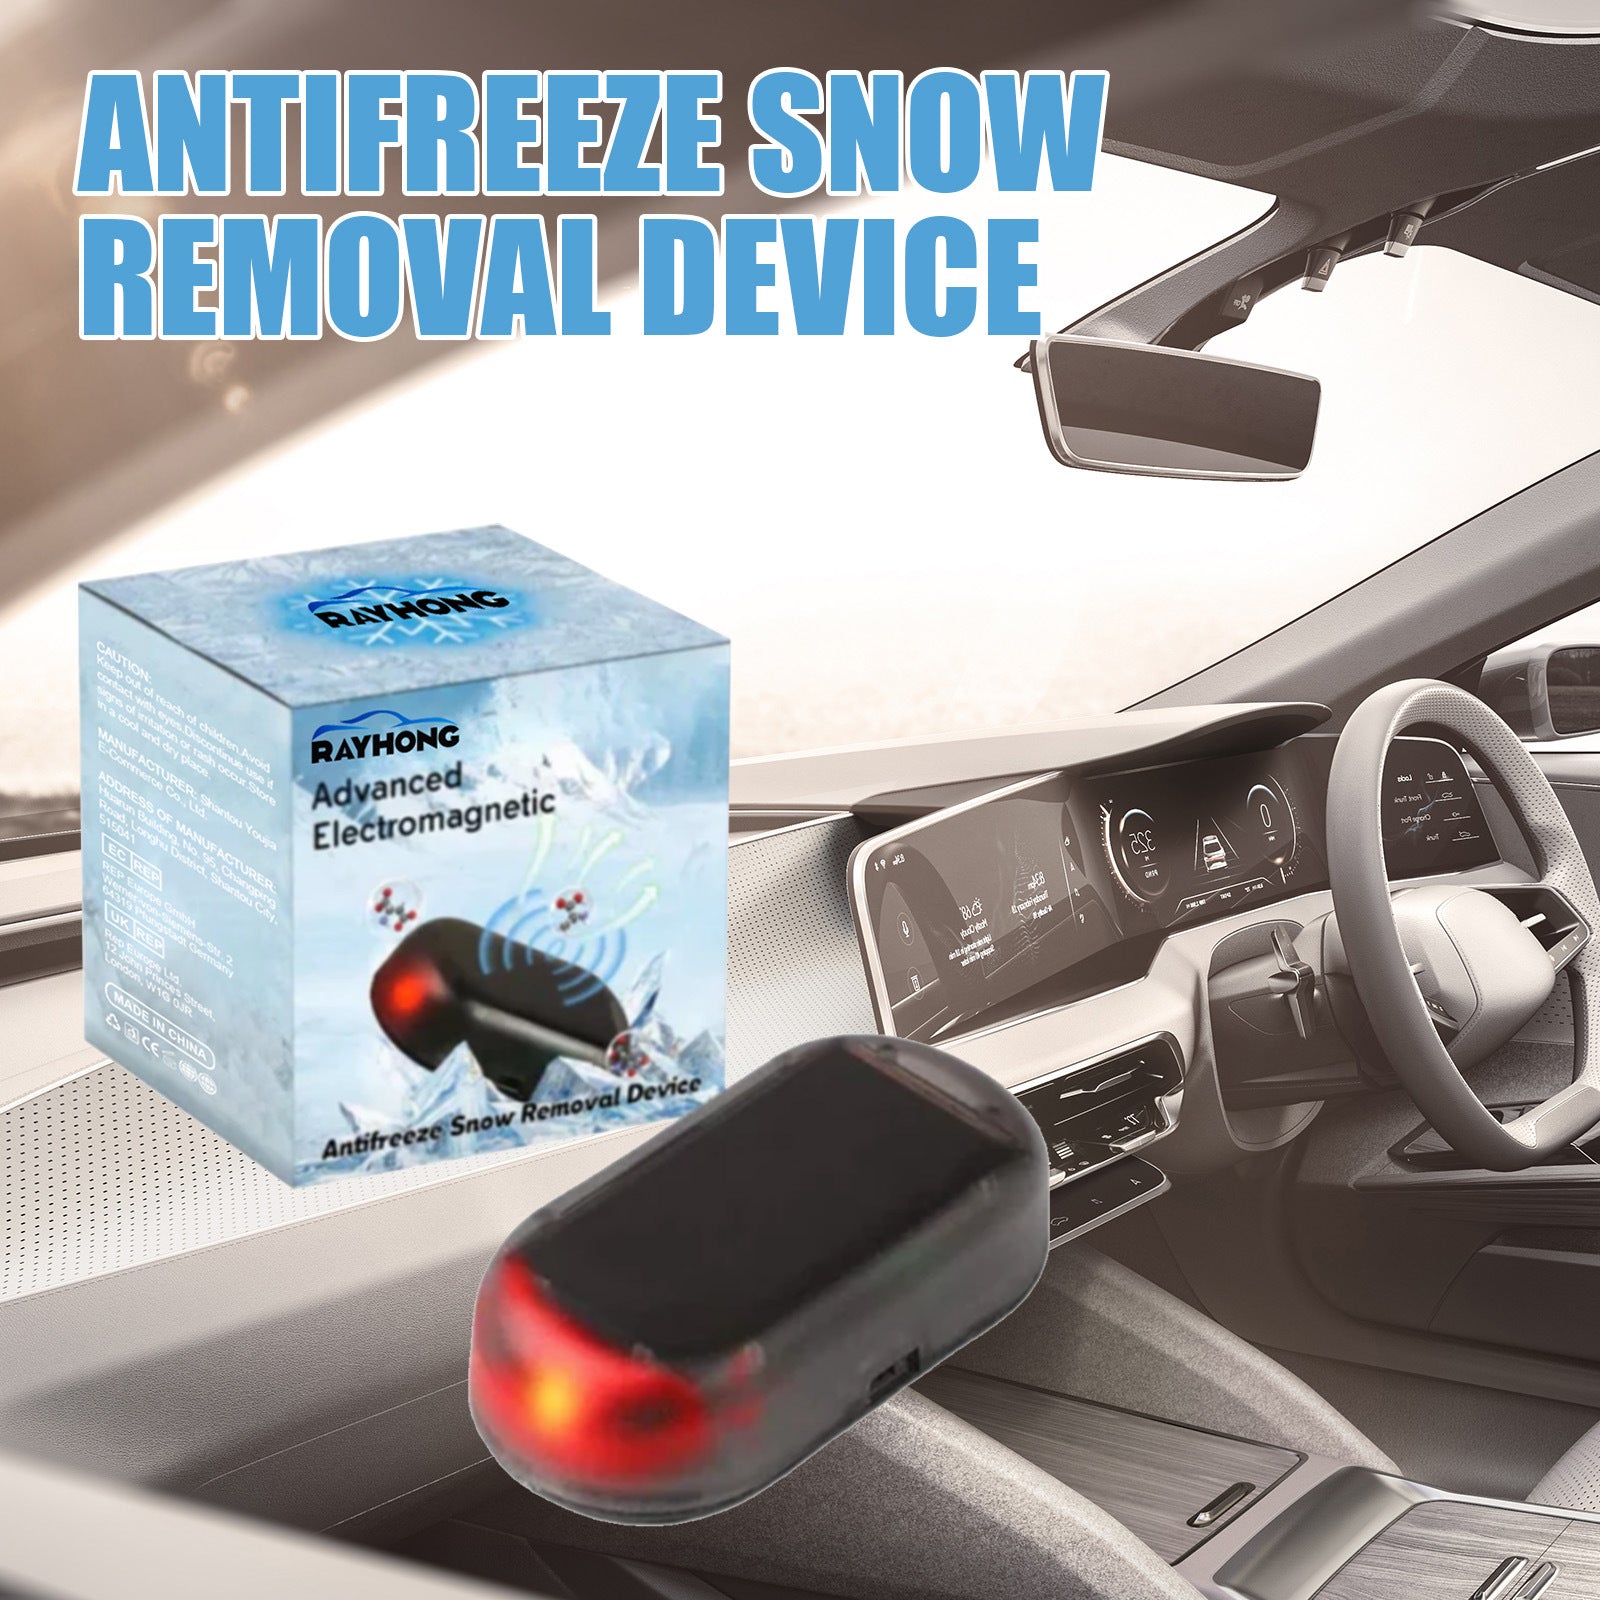 Advanced Electromagnetic Antifreeze Snow Removal Device